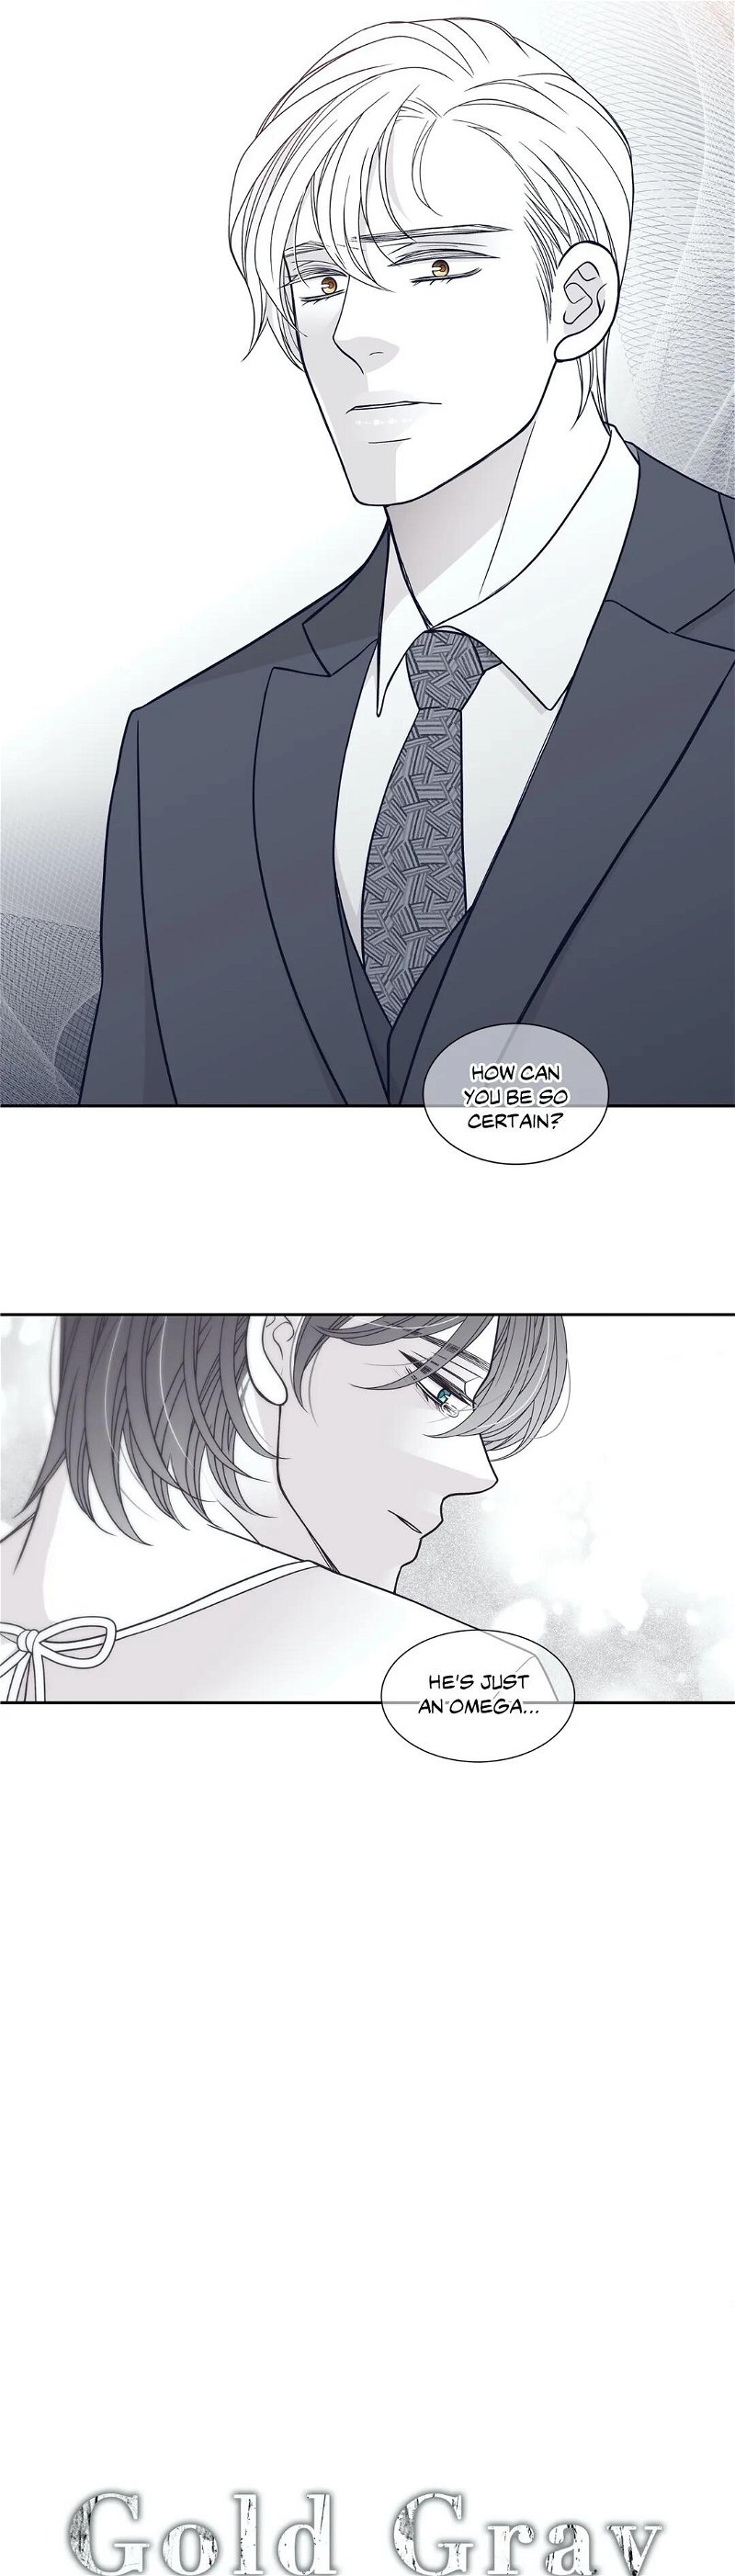 Gold Gray Chapter 51 - Page 3